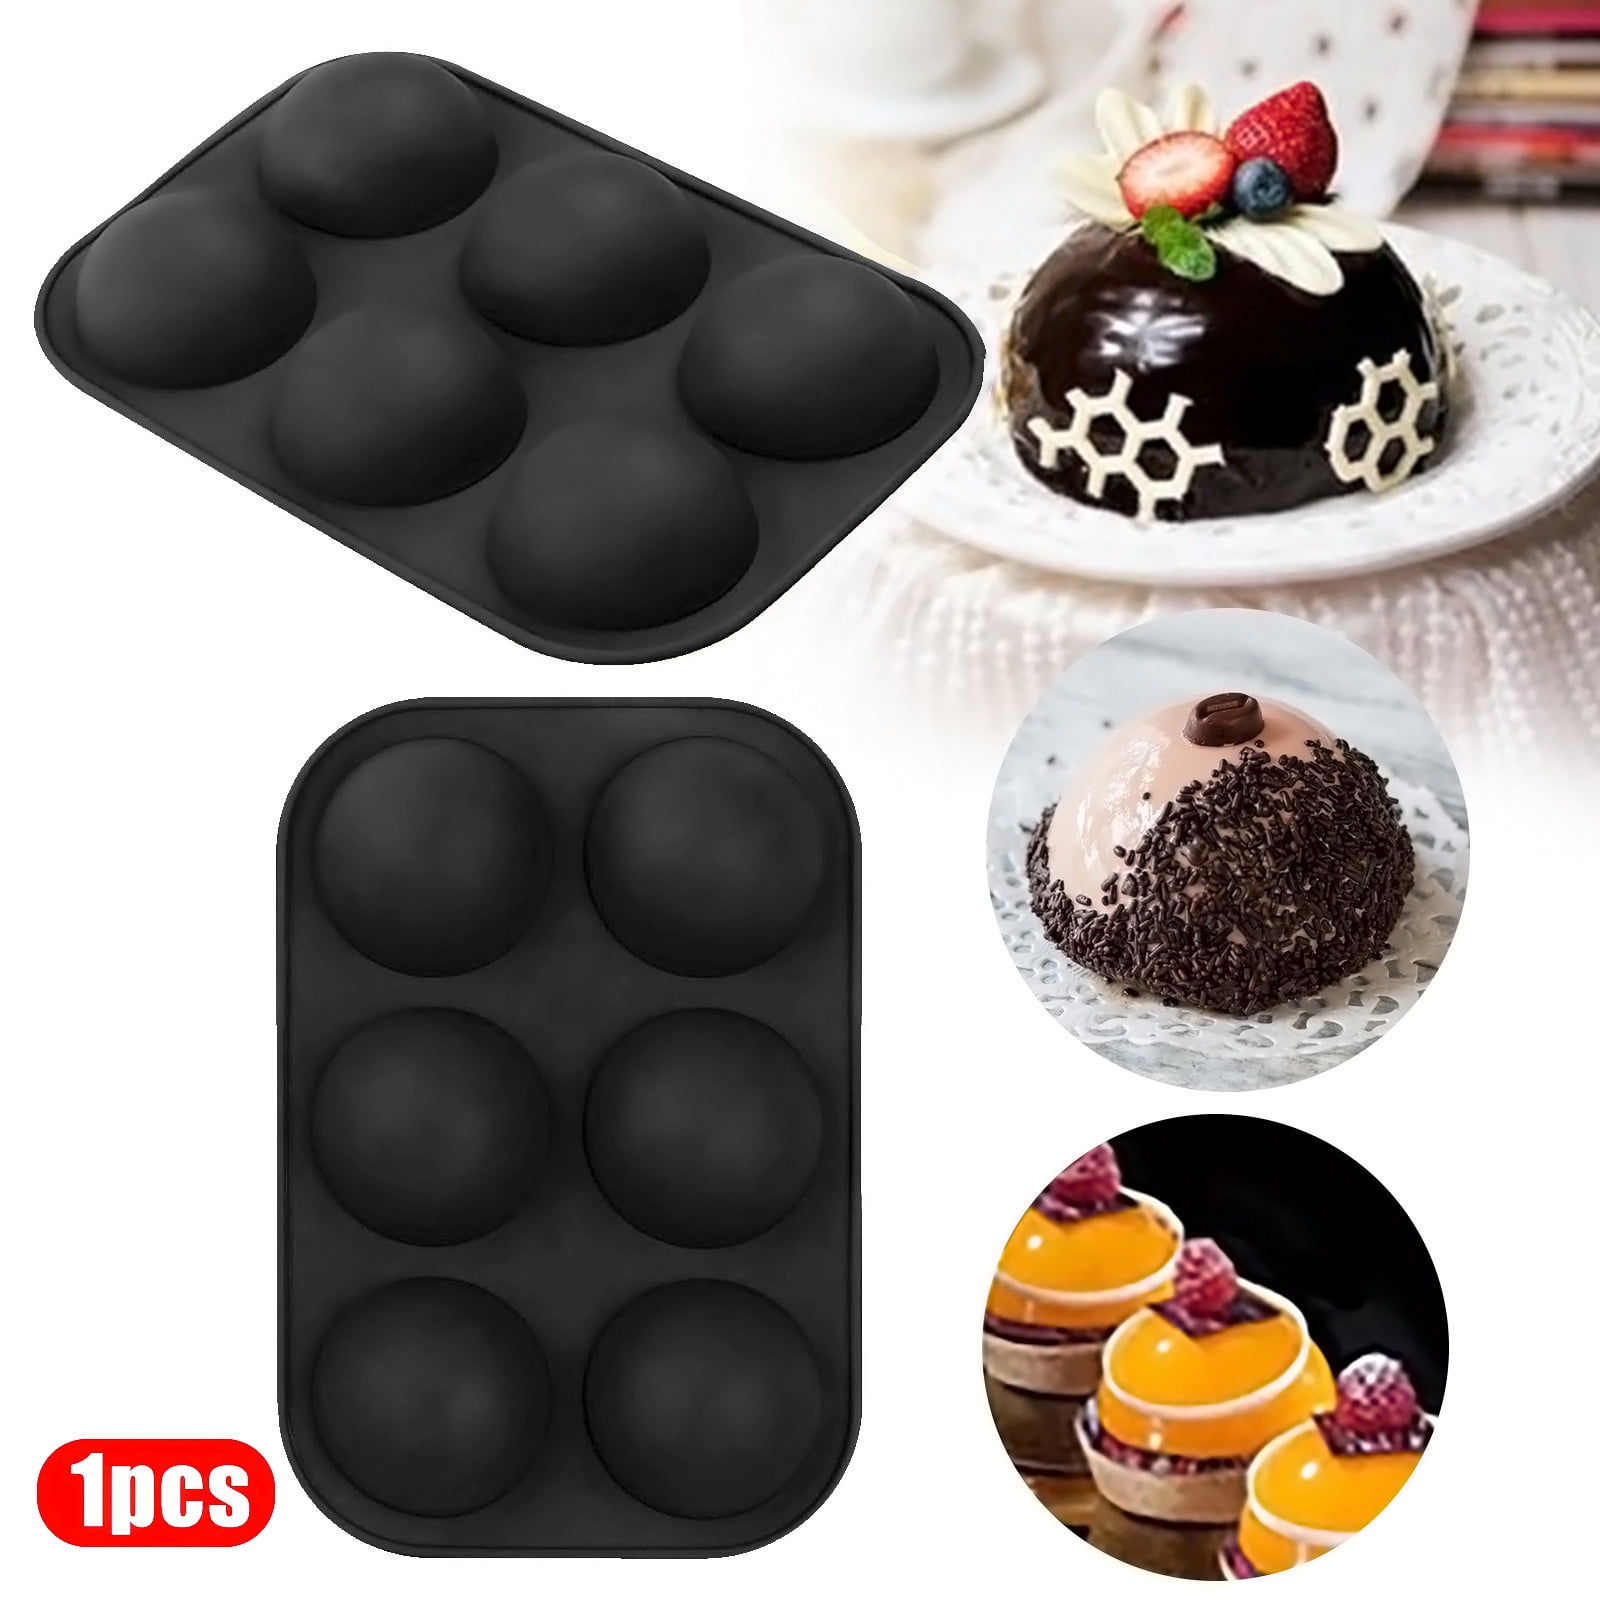 Bar Square Soap Silicone Mold DIY Chocolate Baking Cake Handmade Tool Mould BW 